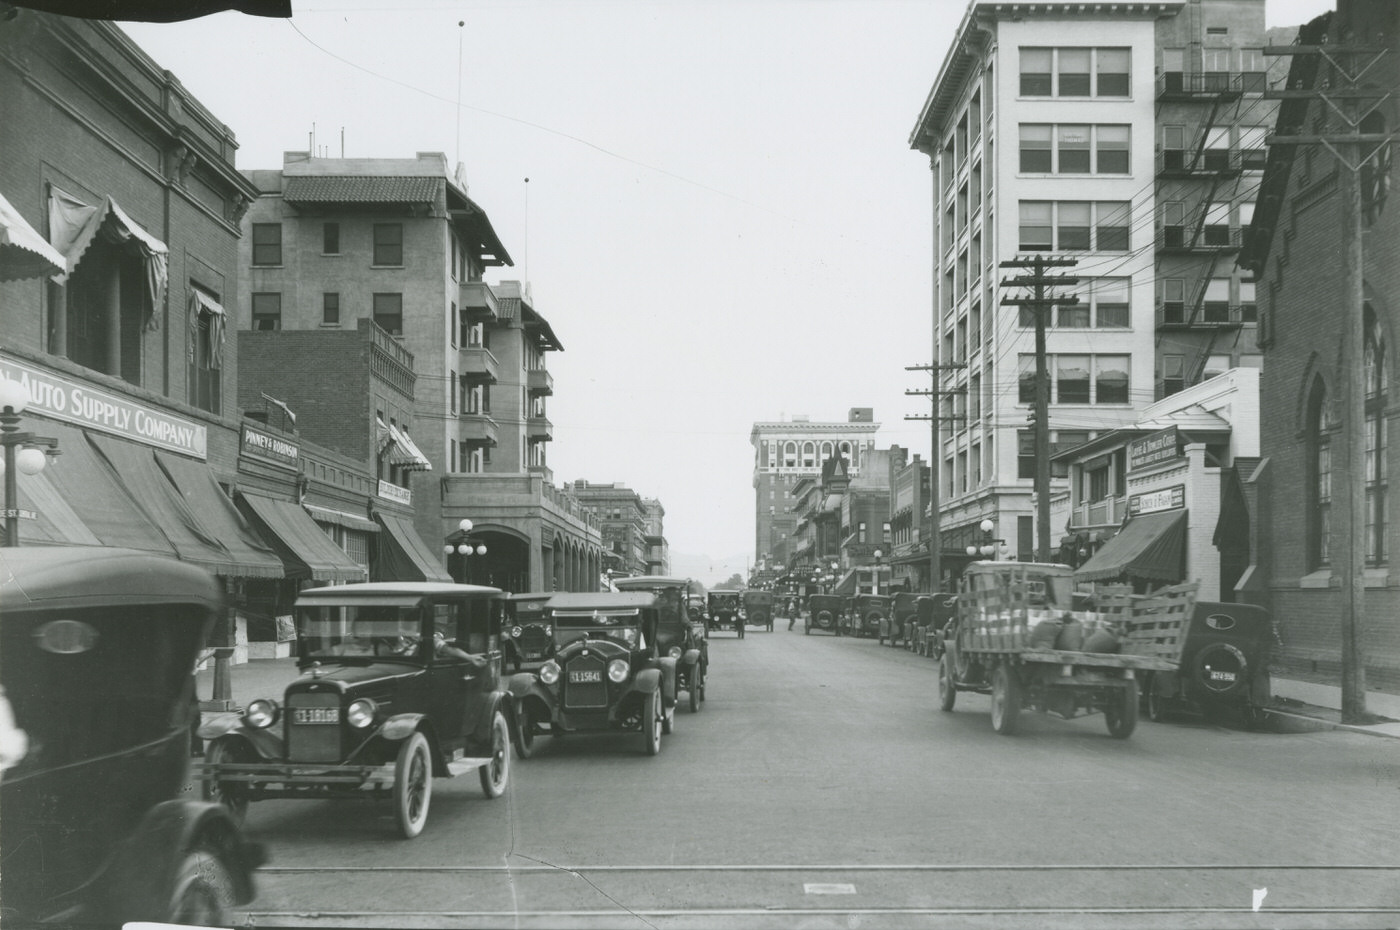 View Looking South on Central Ave. From Monroe St. The Heard Building, the Adams Hotel, and the Luhrs Building are visible., 1930s